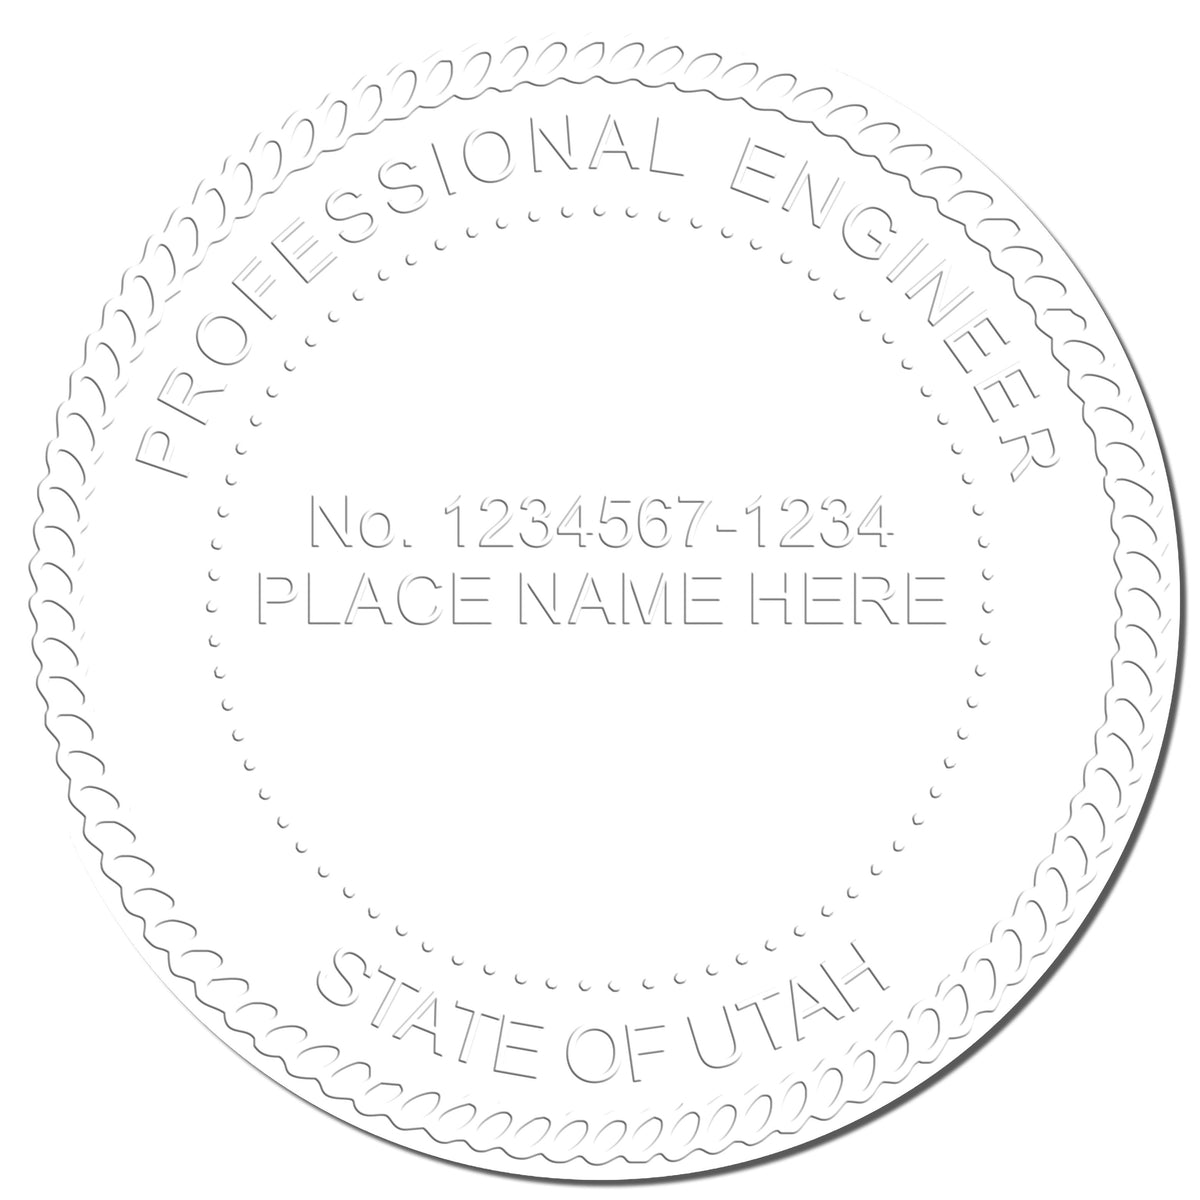 This paper is stamped with a sample imprint of the State of Utah Extended Long Reach Engineer Seal, signifying its quality and reliability.